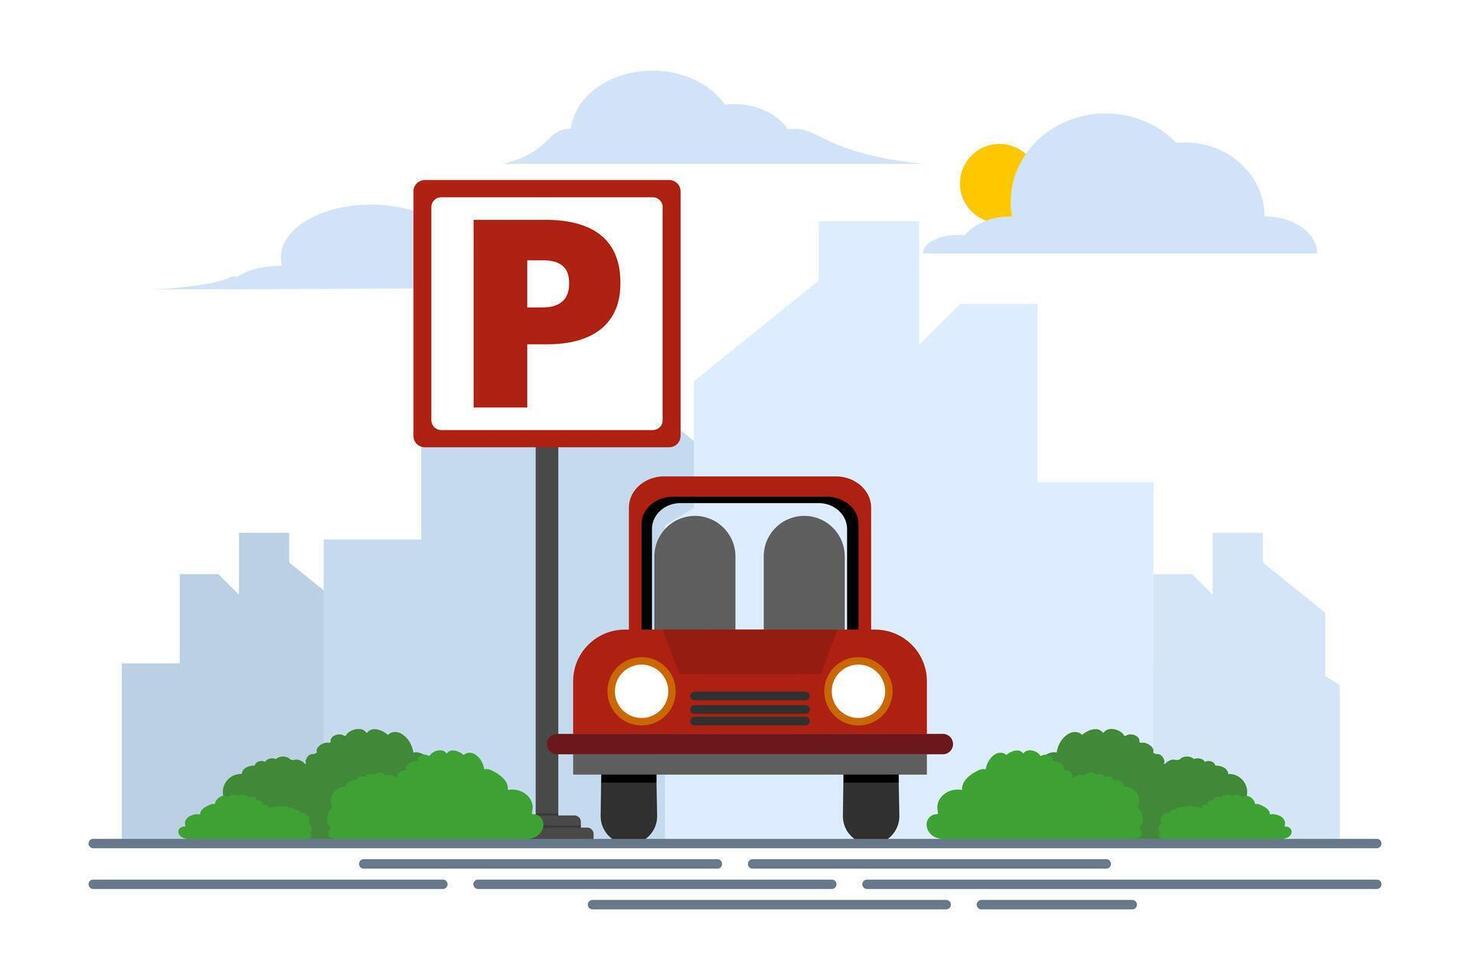 Big road sign parking concept. looking for a parking space, parking the car. Public car parking in big city. Urban transportation. Modern flat cartoon style. illustration on white background. vector